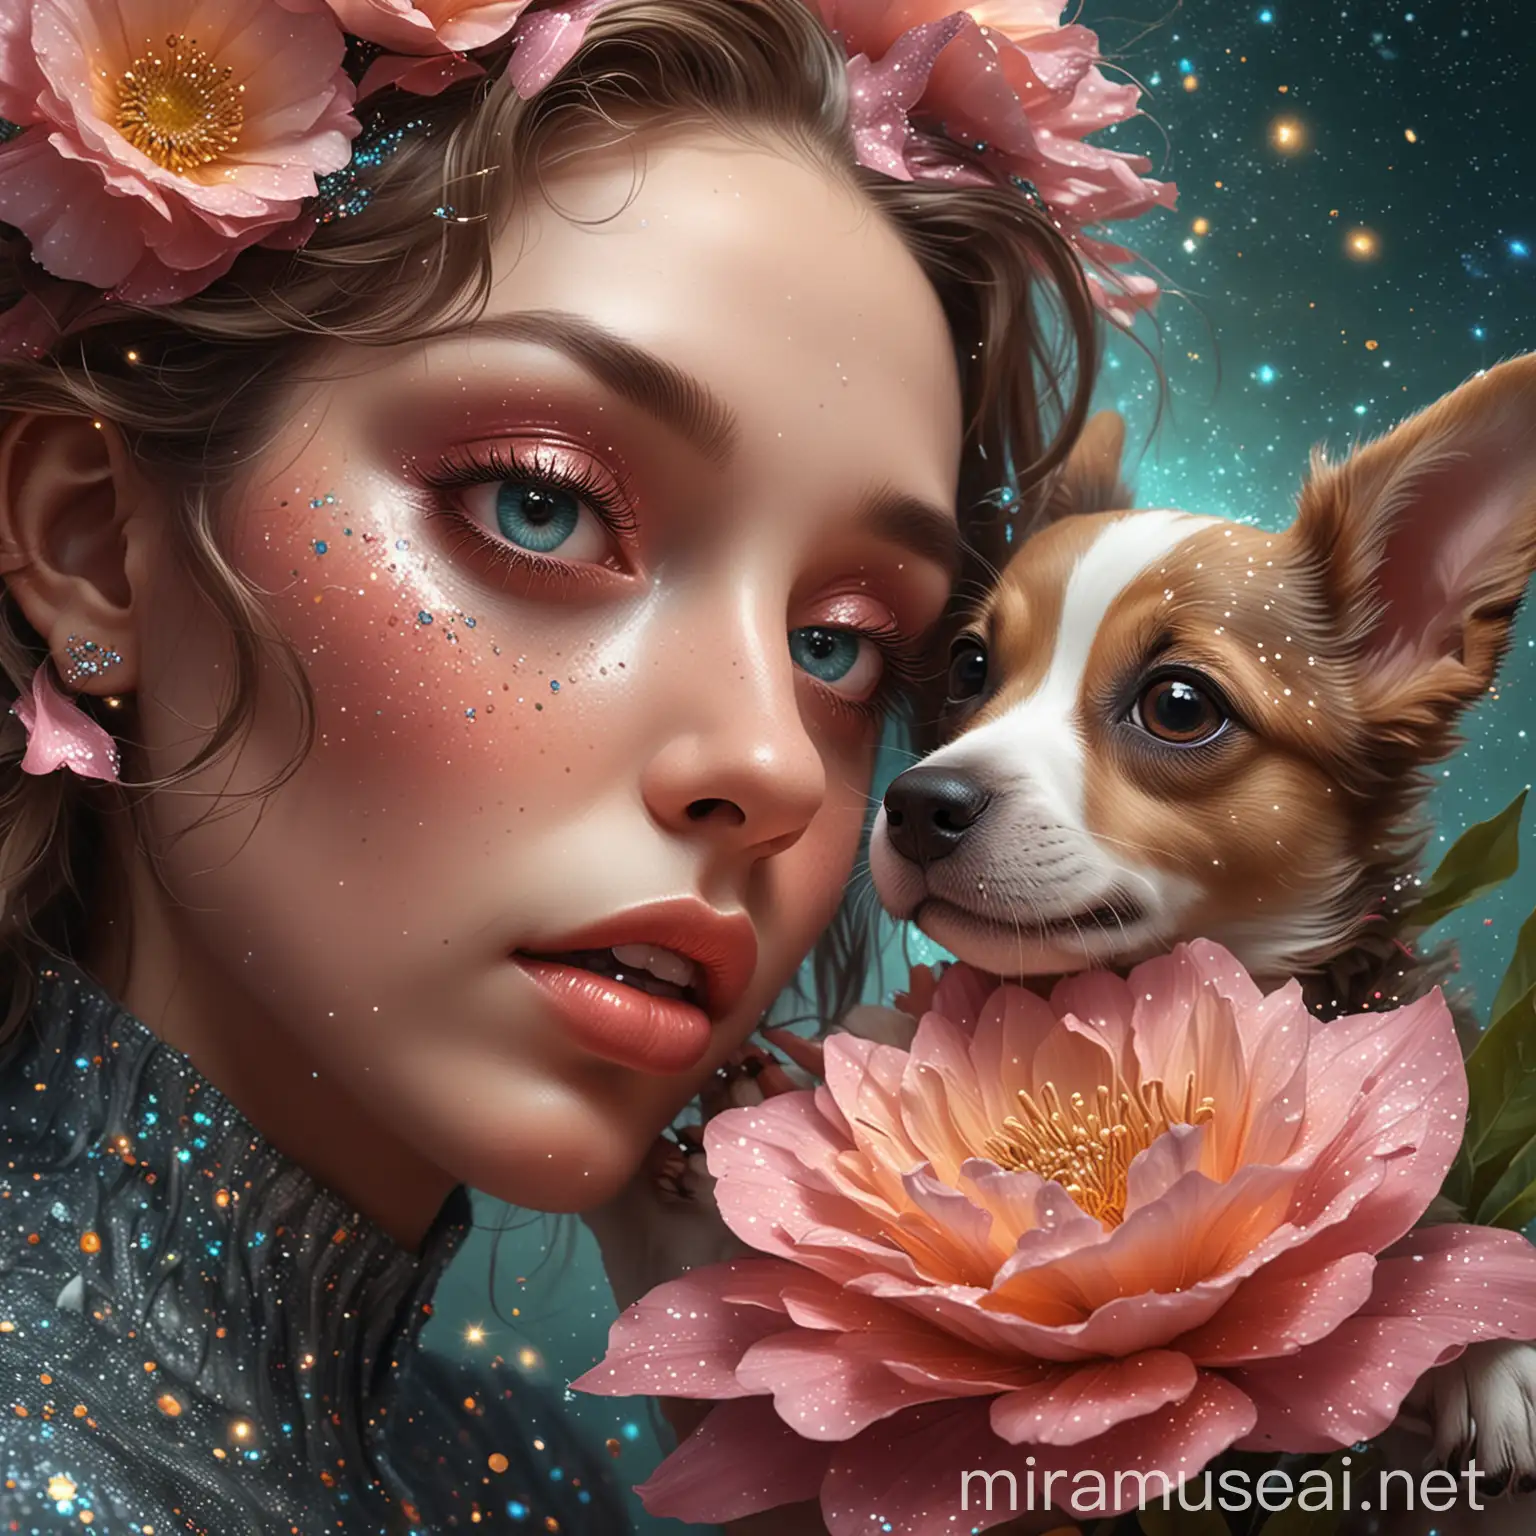 Surreal Digital Art Woman Holding Eye Open with Glitter Flower and Puppy Looking In